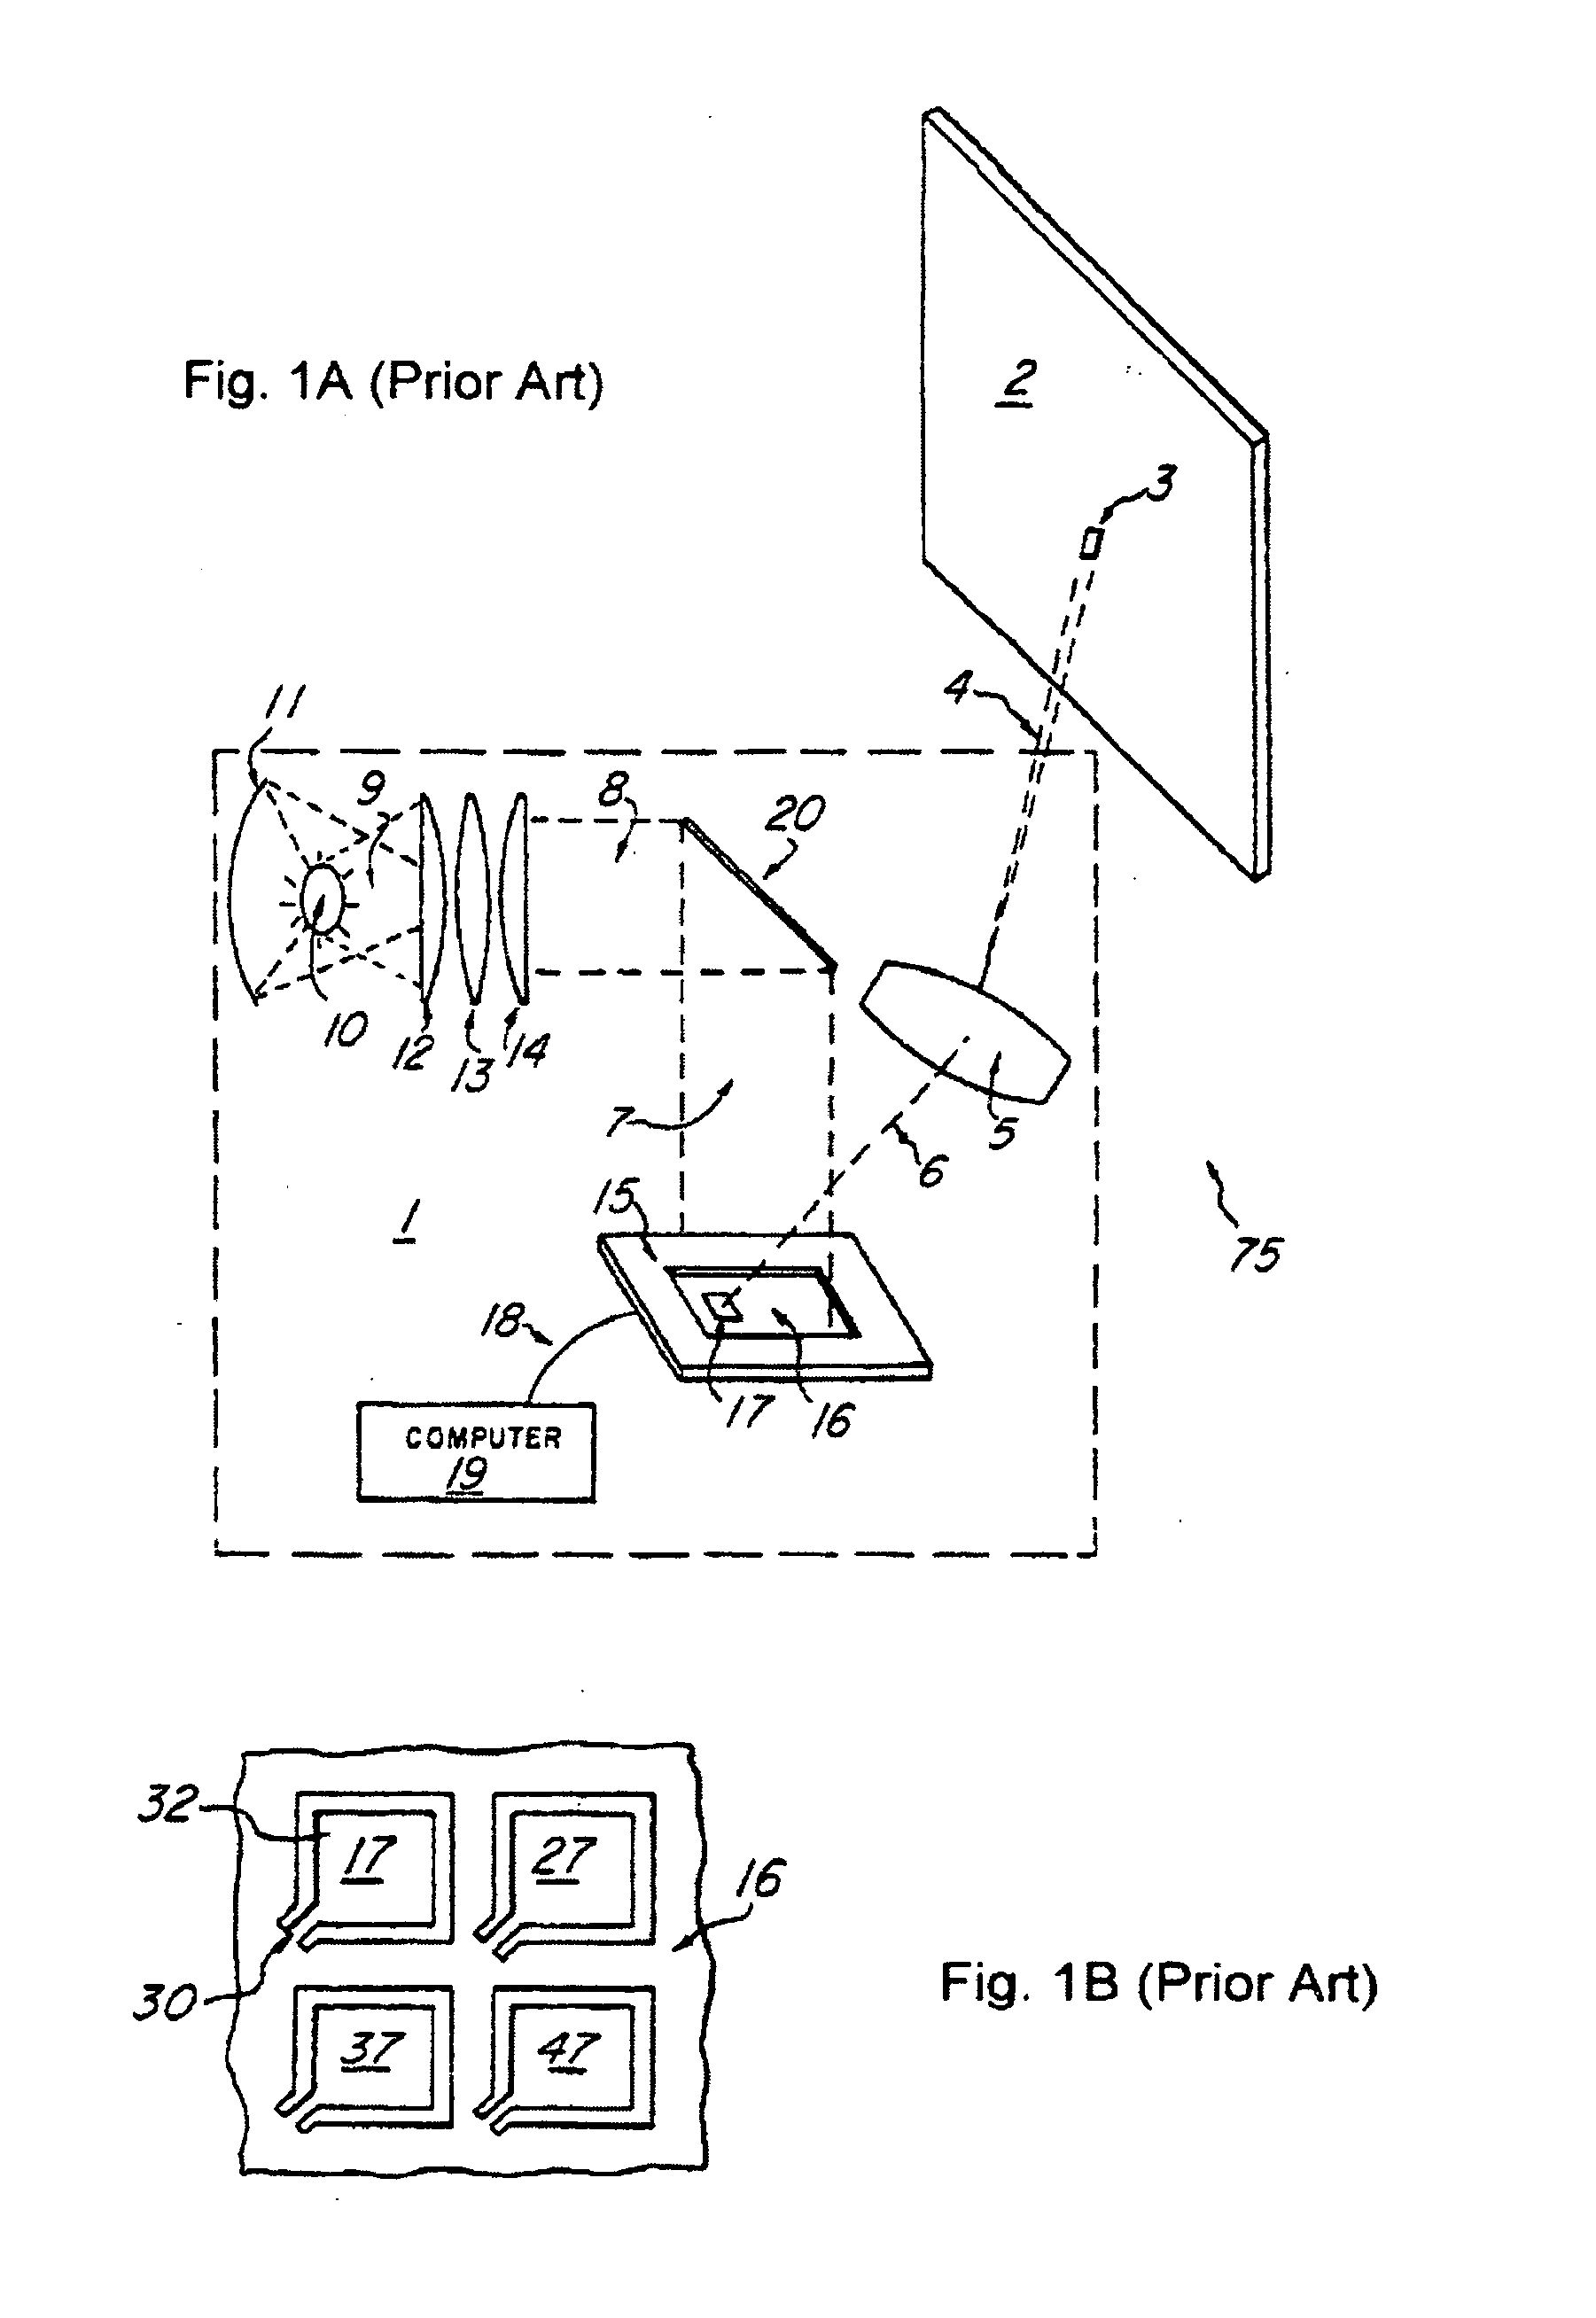 Display system for higher grayscale with a varying light source